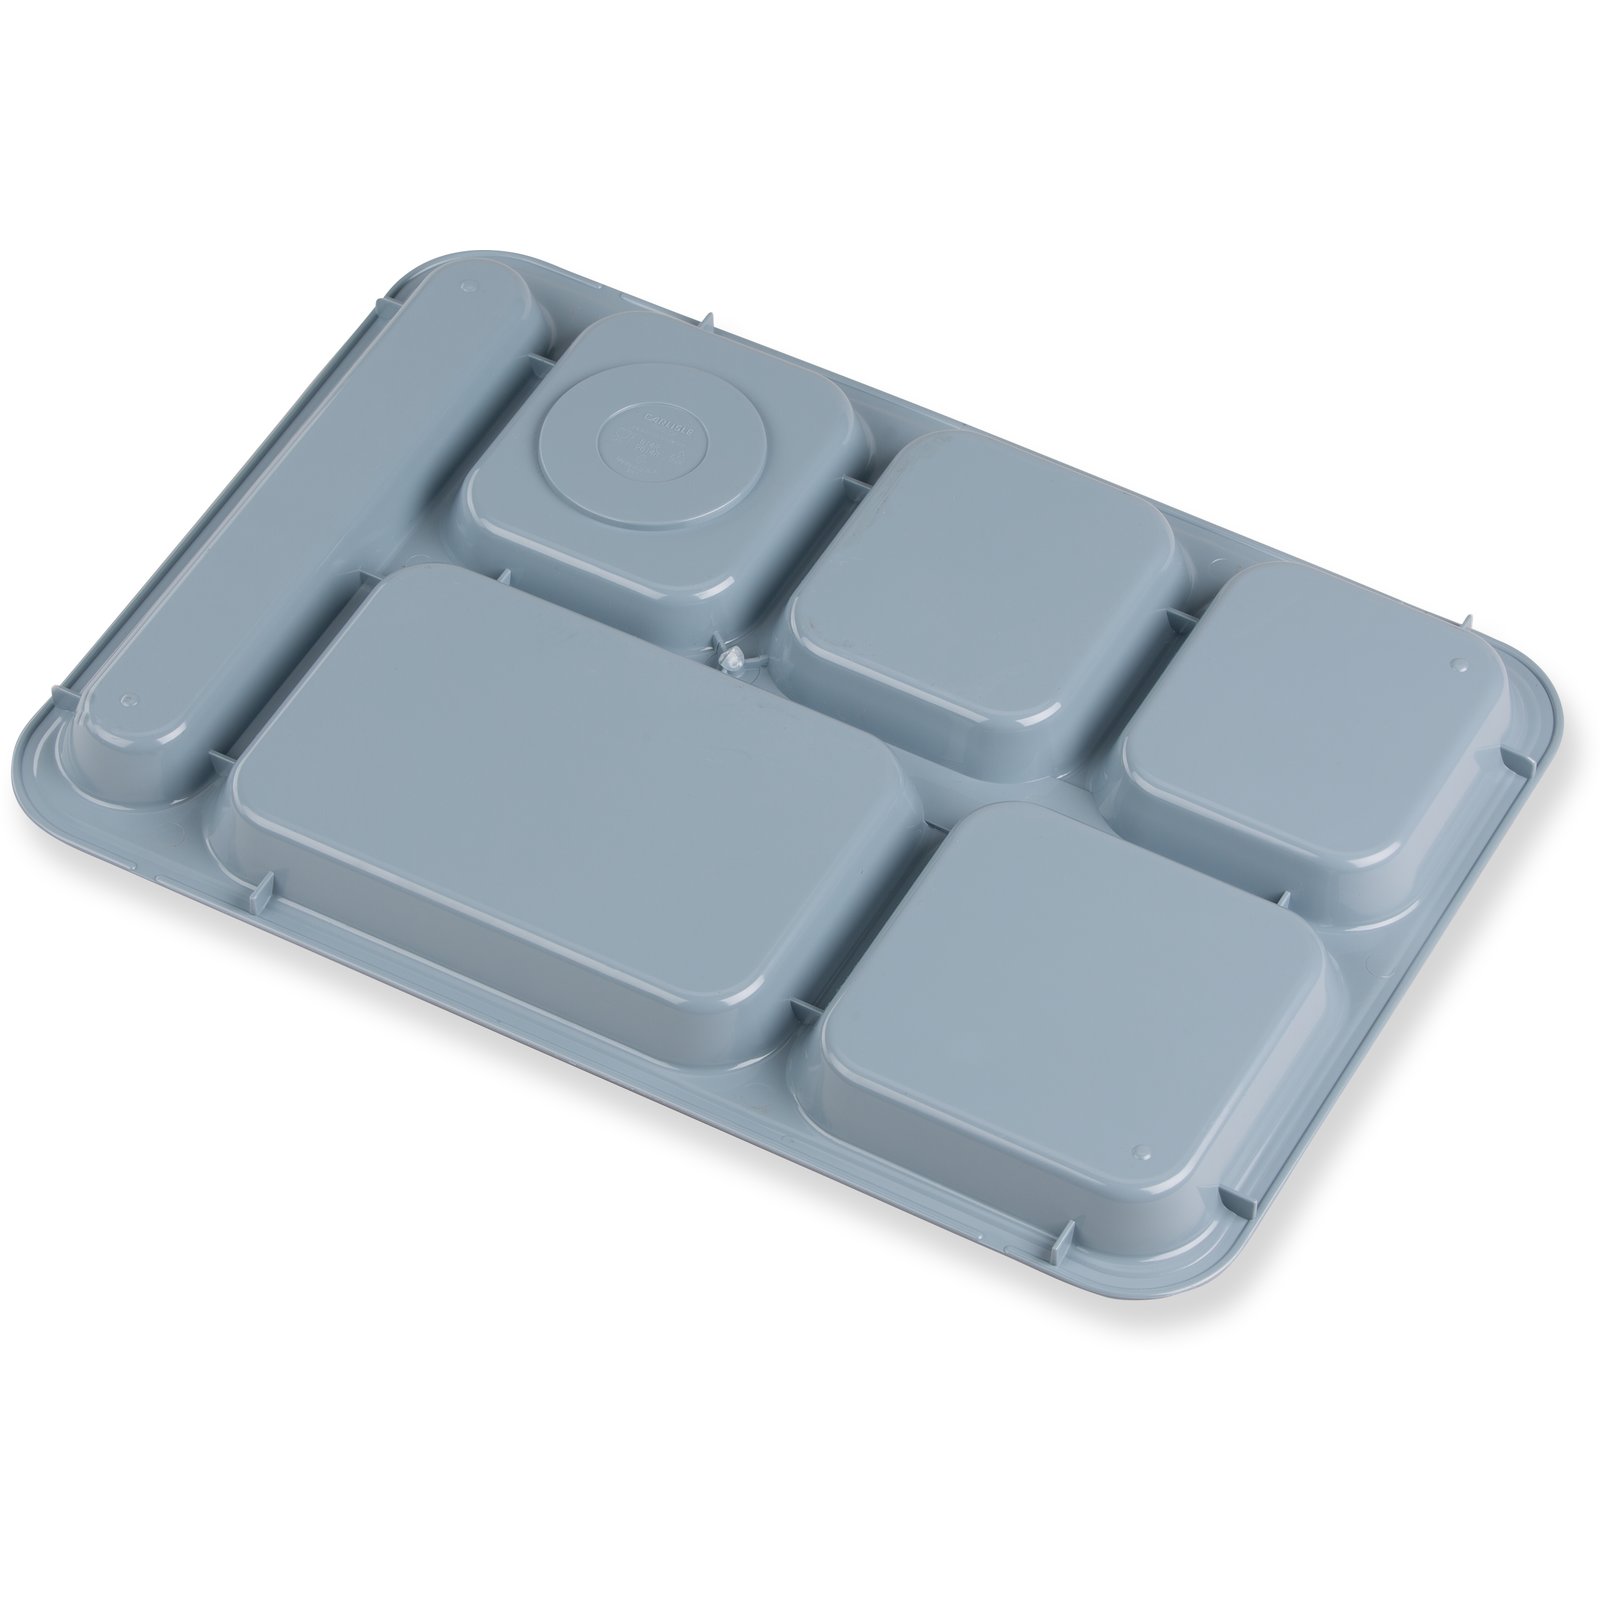 614R59 - Right-Hand 6-Compartment ABS Tray 10 x 14 - Slate Blue